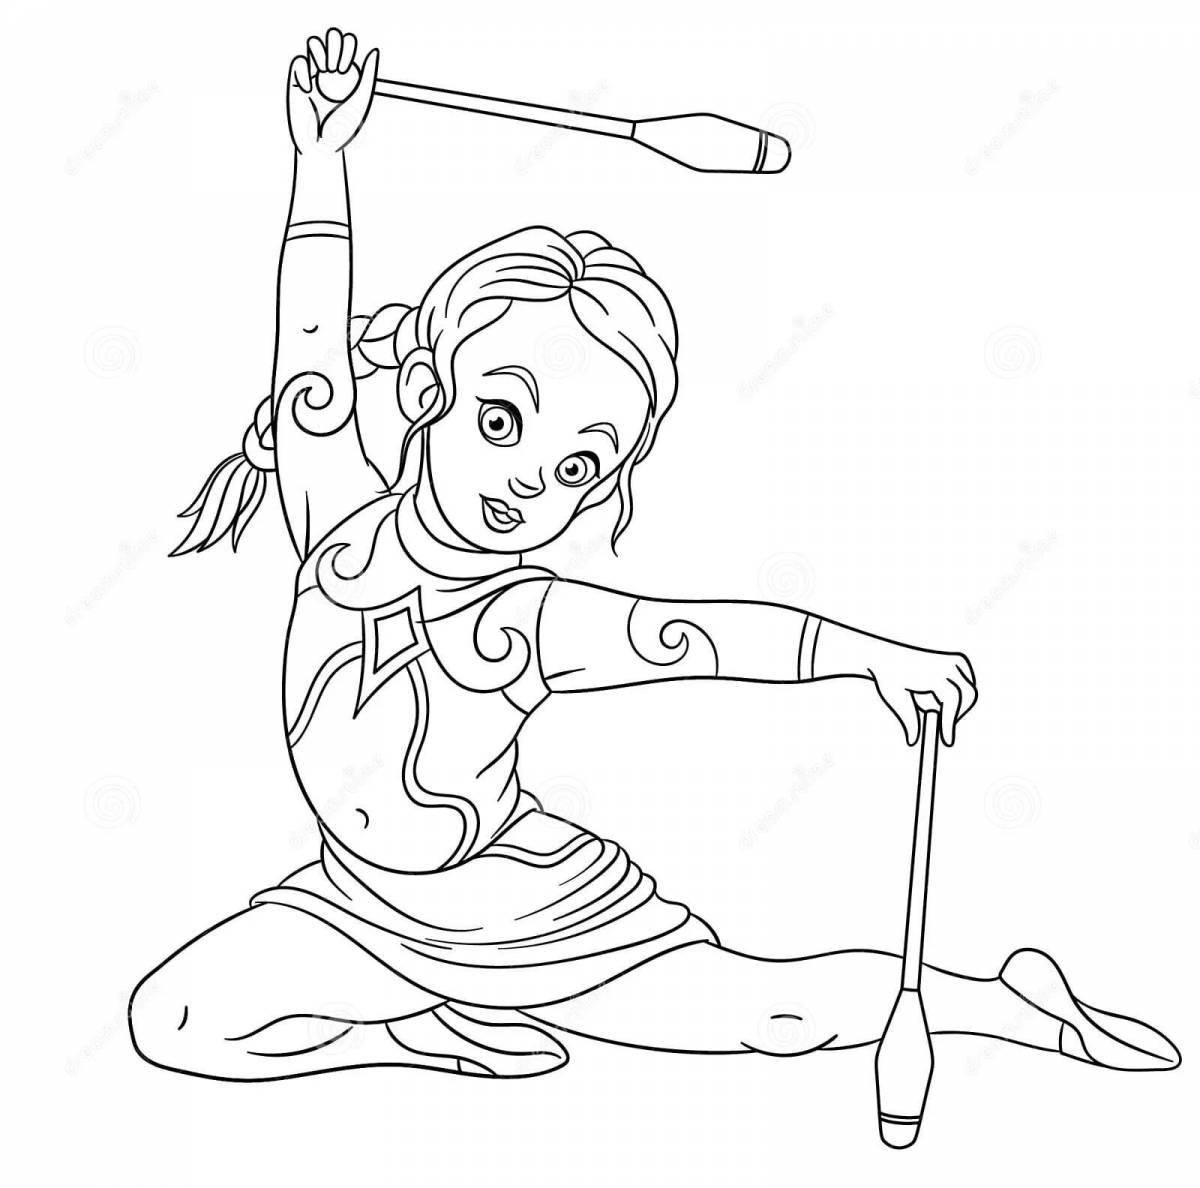 Shining gymnastics coloring book for girls